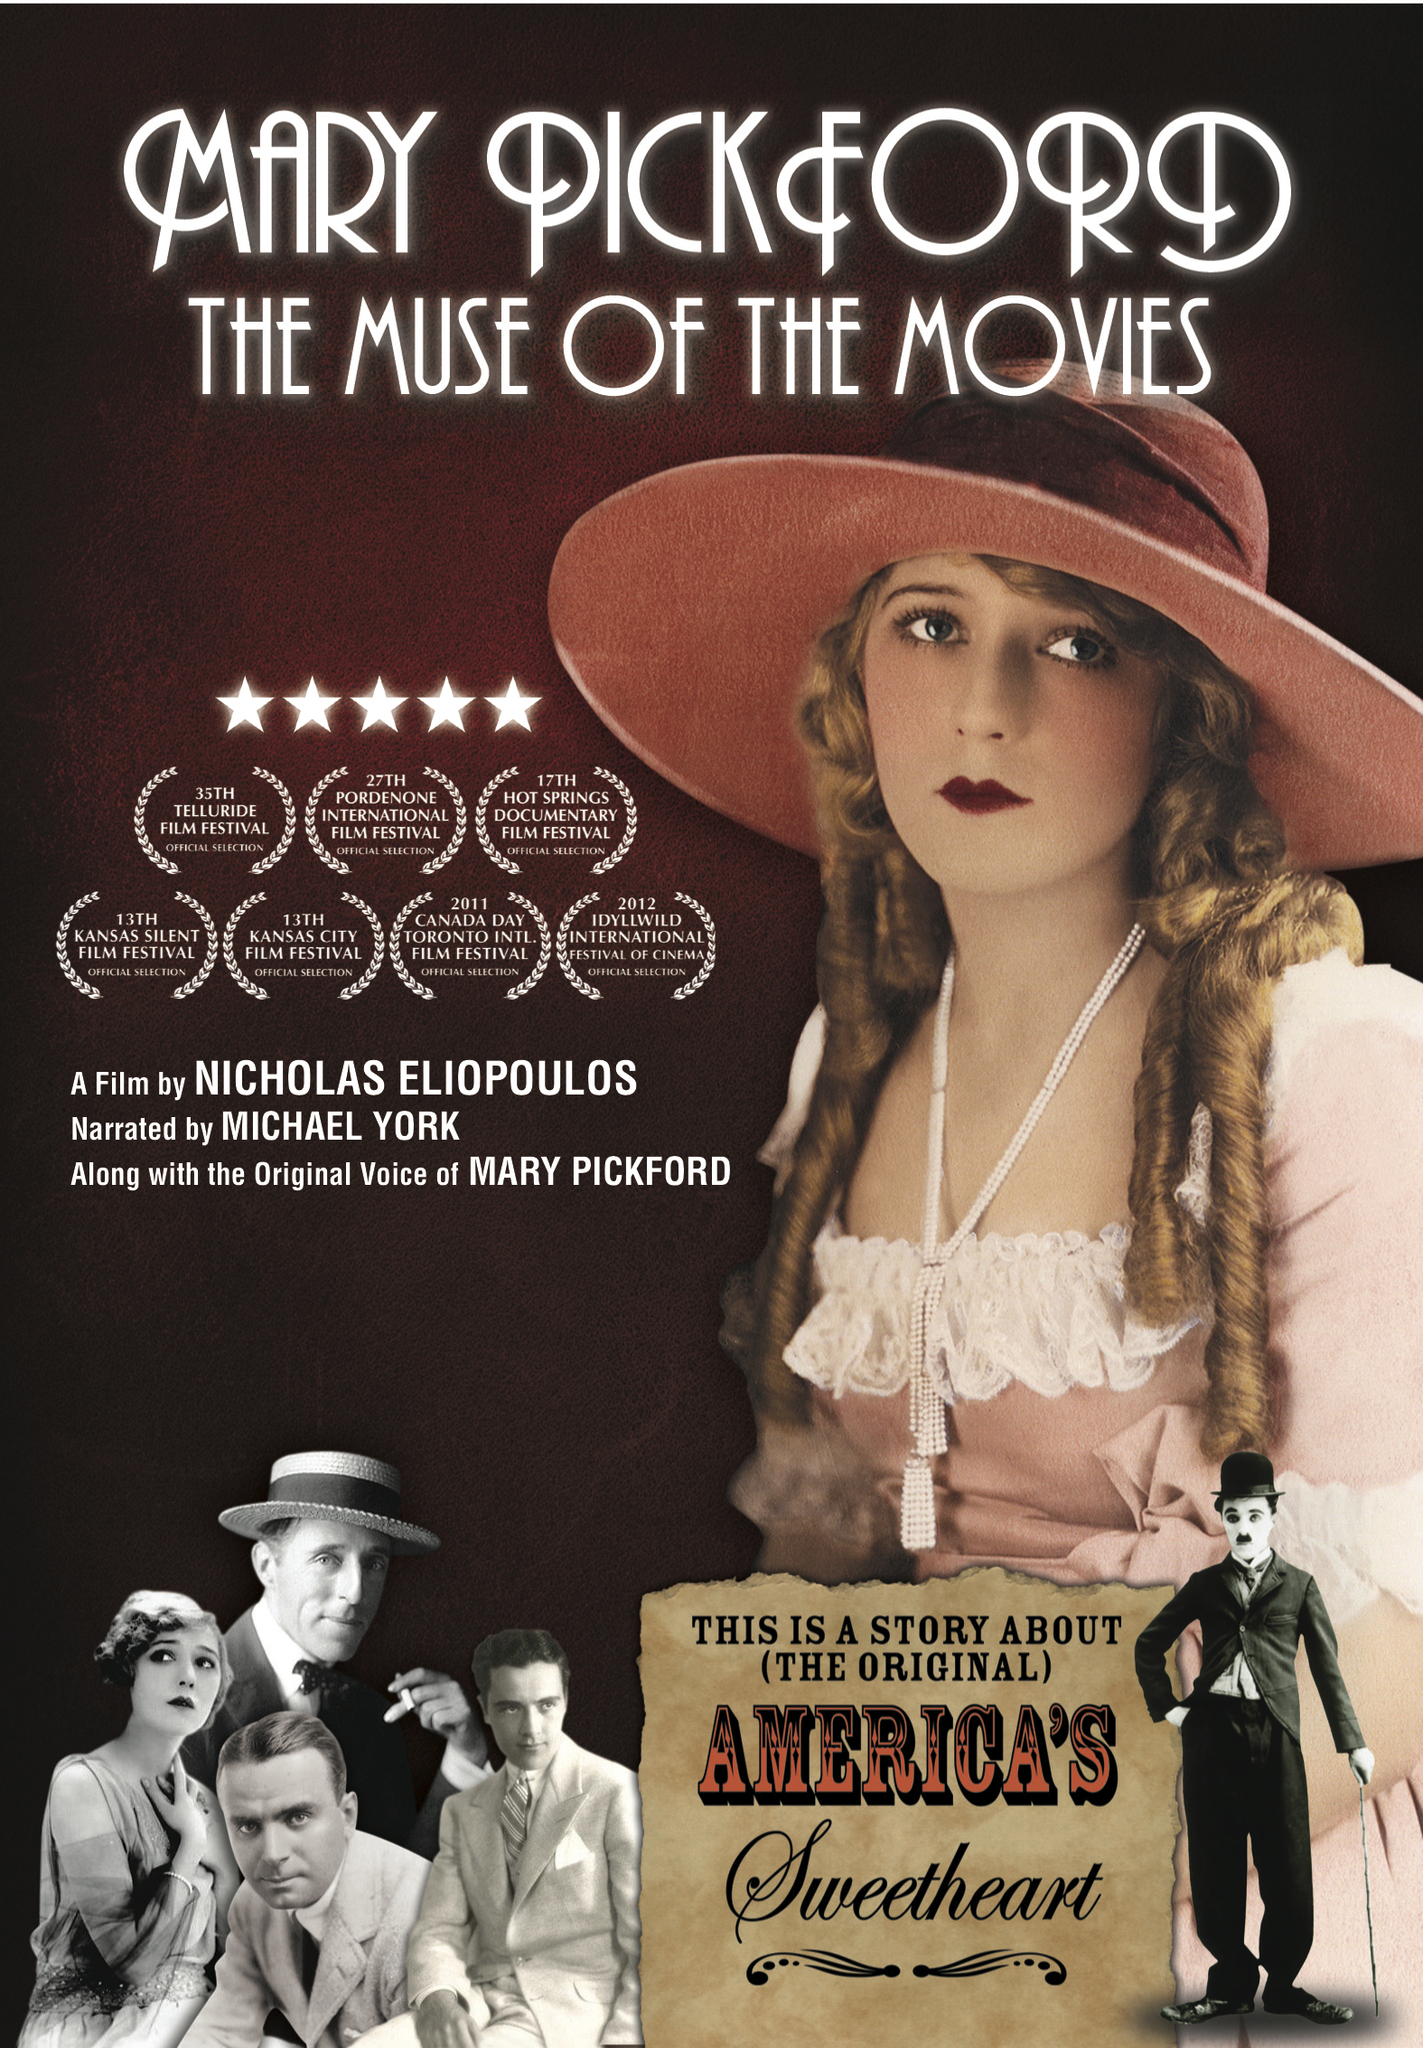 Mary Pickford: The Muse of the Movies (2008) Screenshot 1